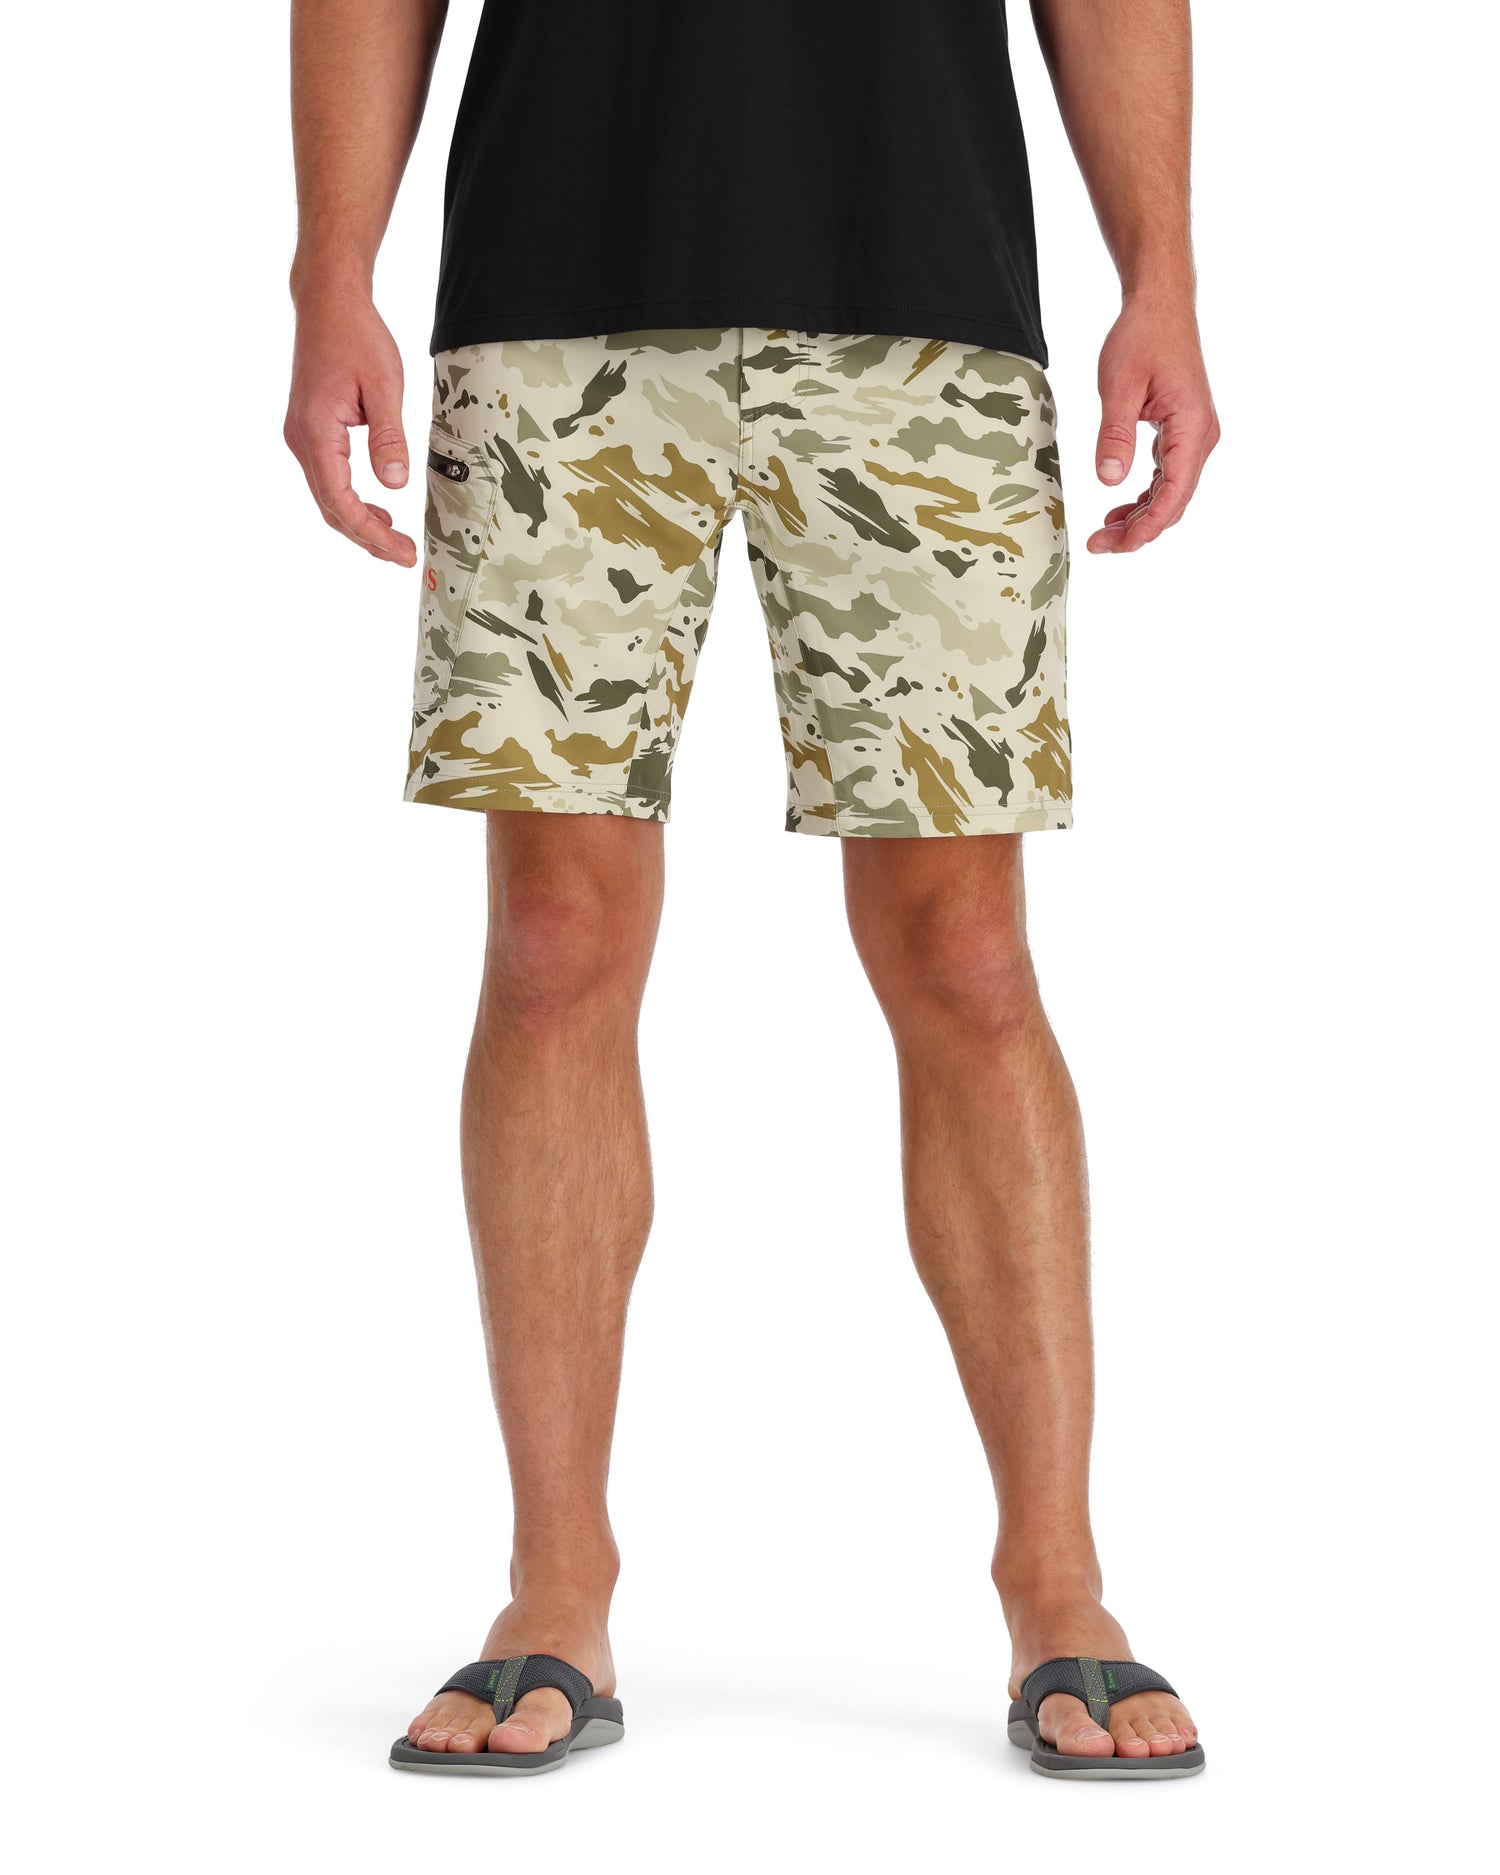 13495-3002-seamount-board-shorts-Model-s23-front 